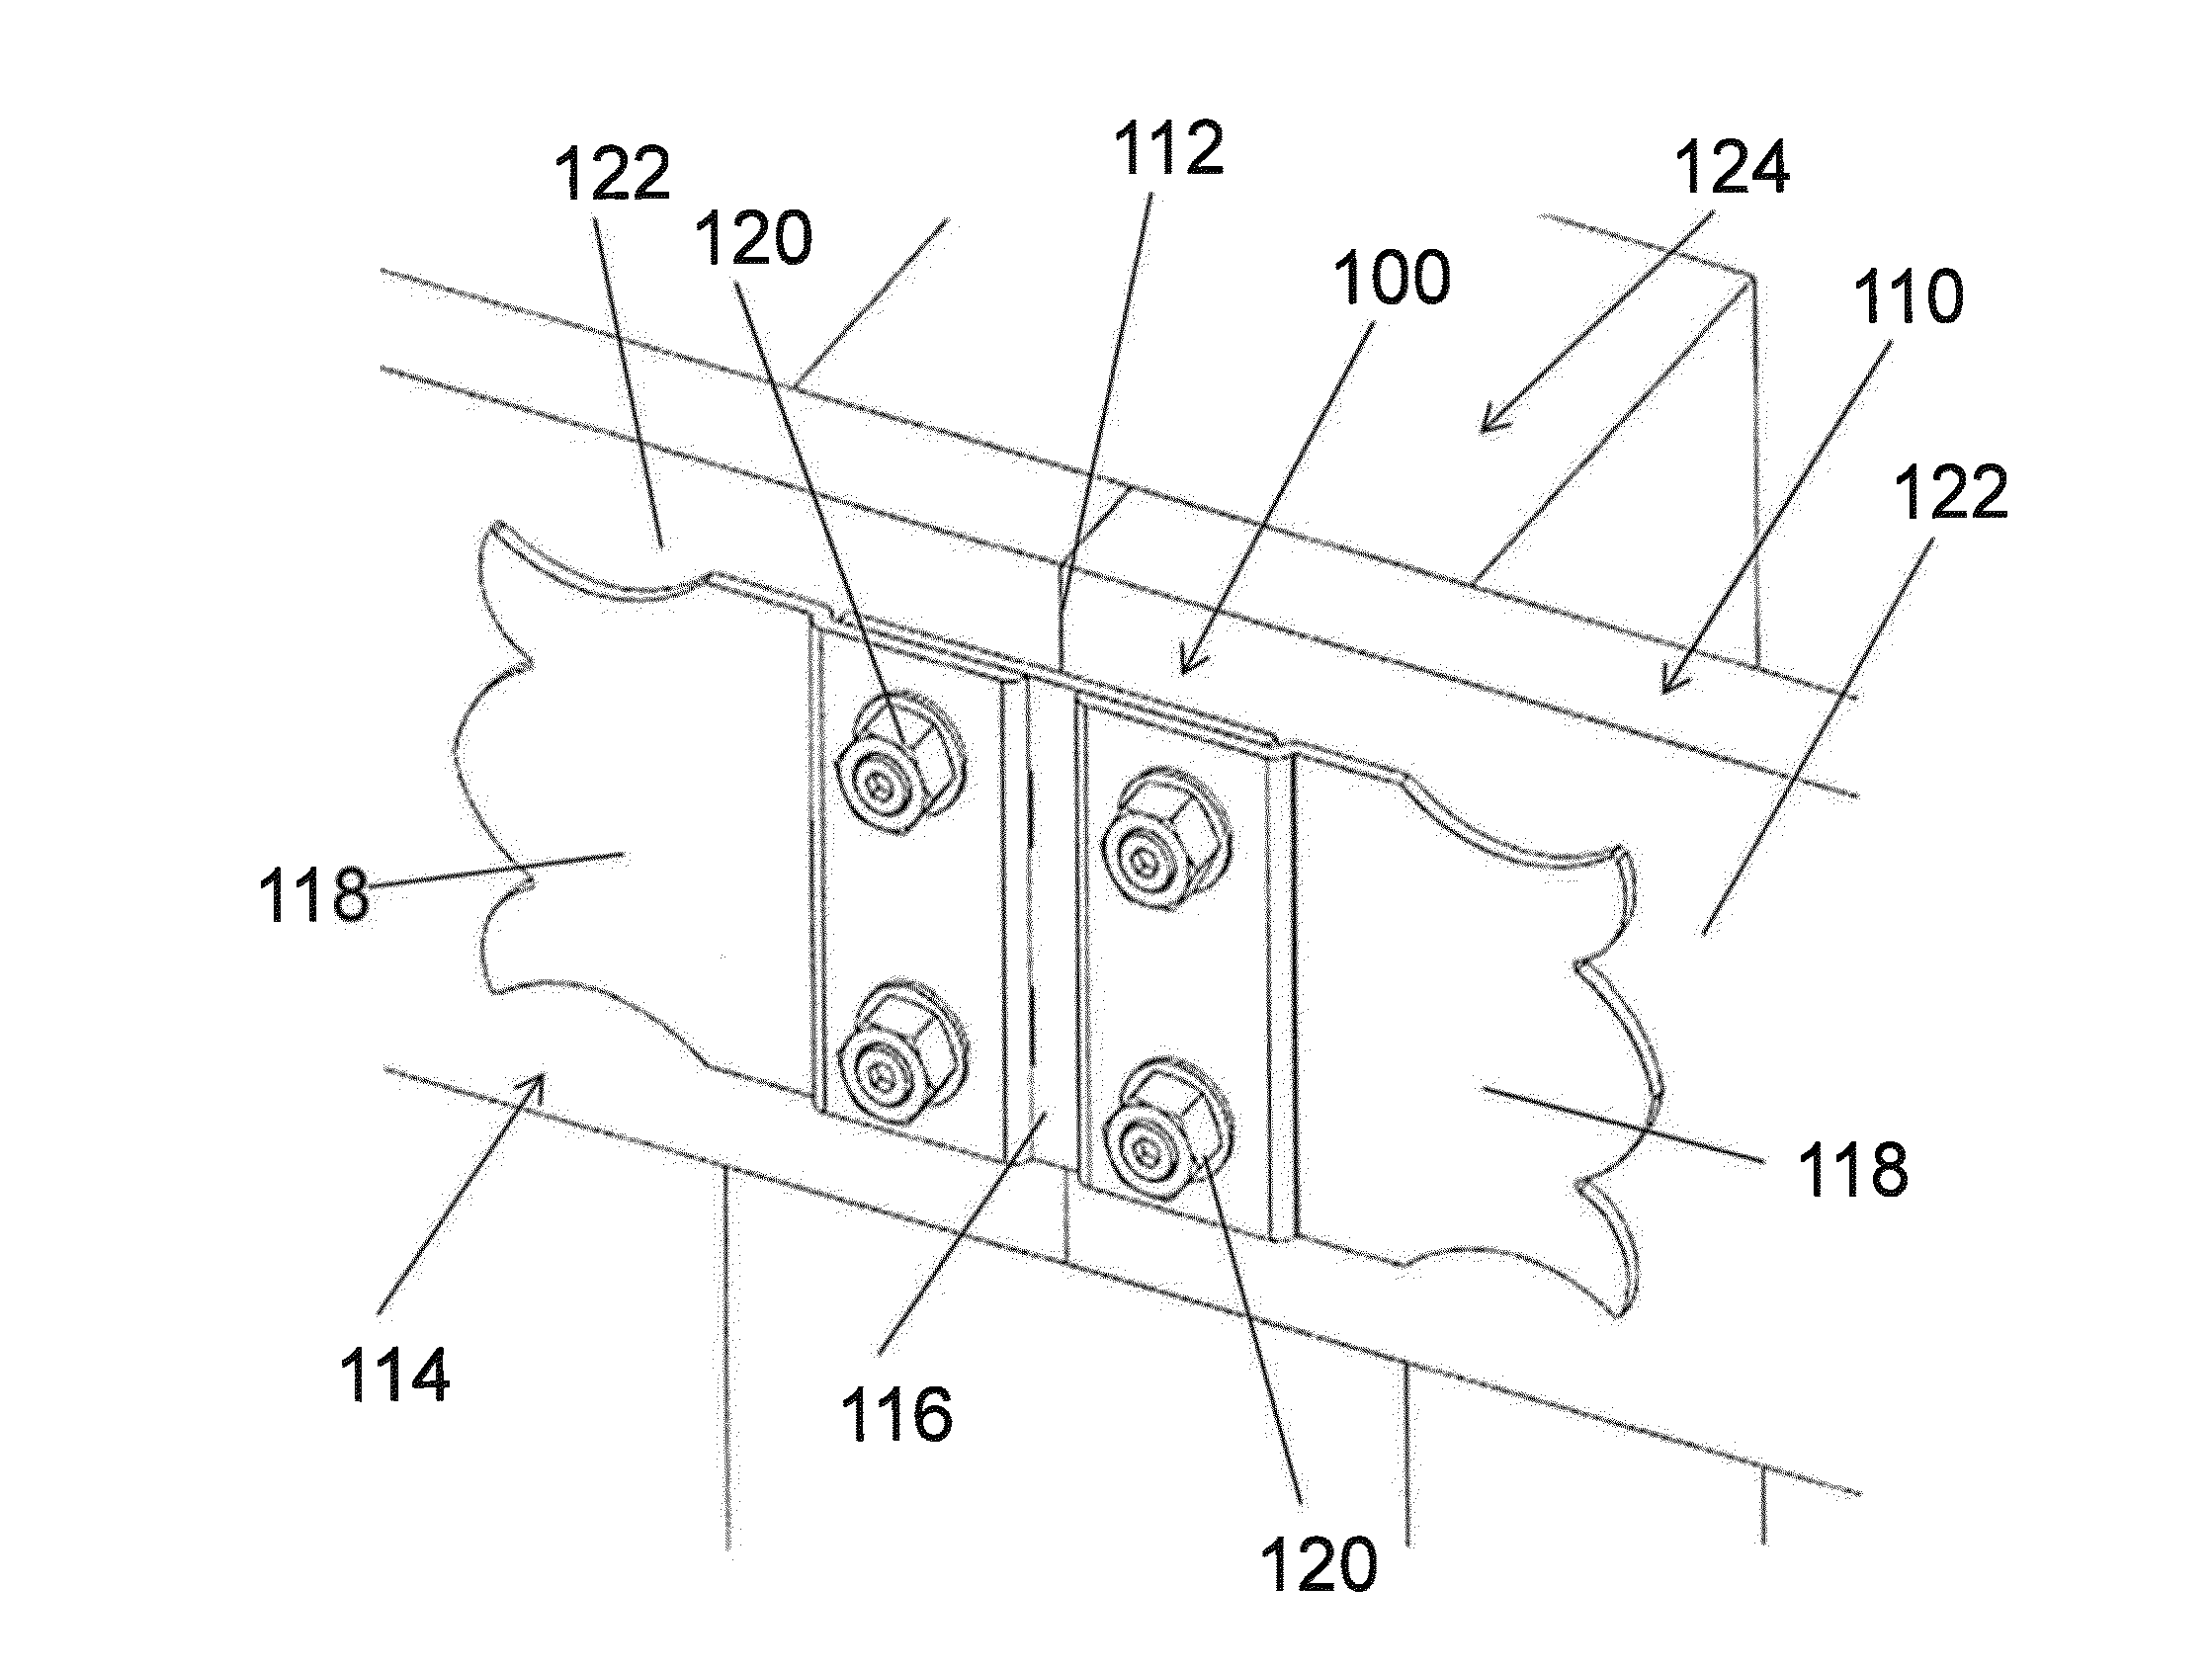 Multi-piece truss plate for use in joining two structural members